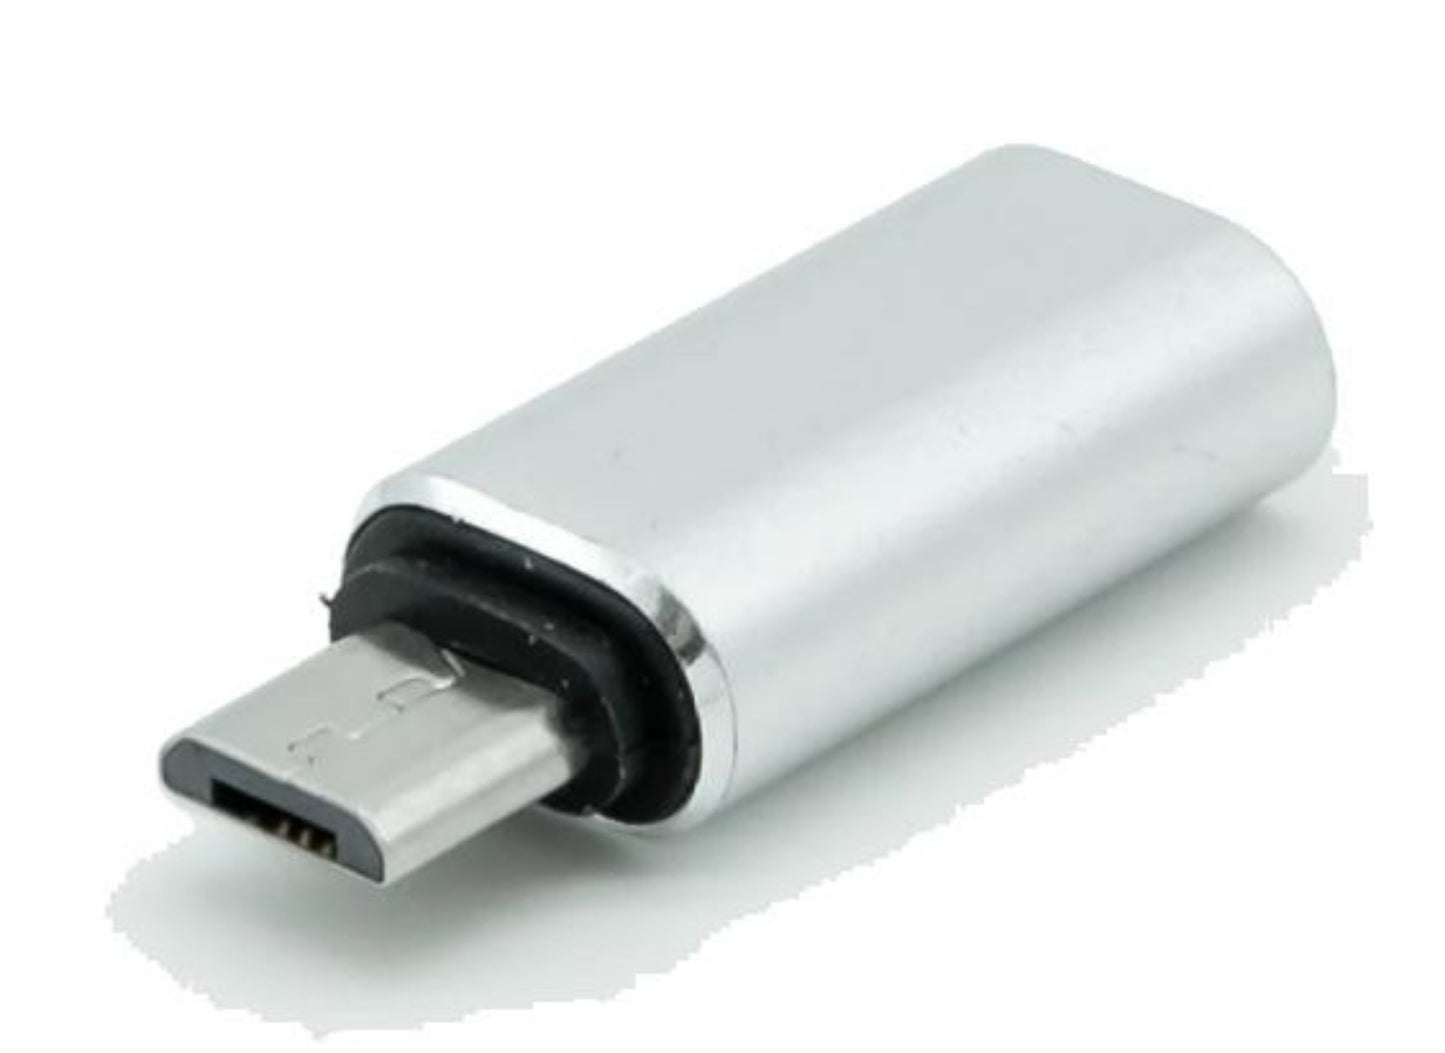 Female to male sync charge connector